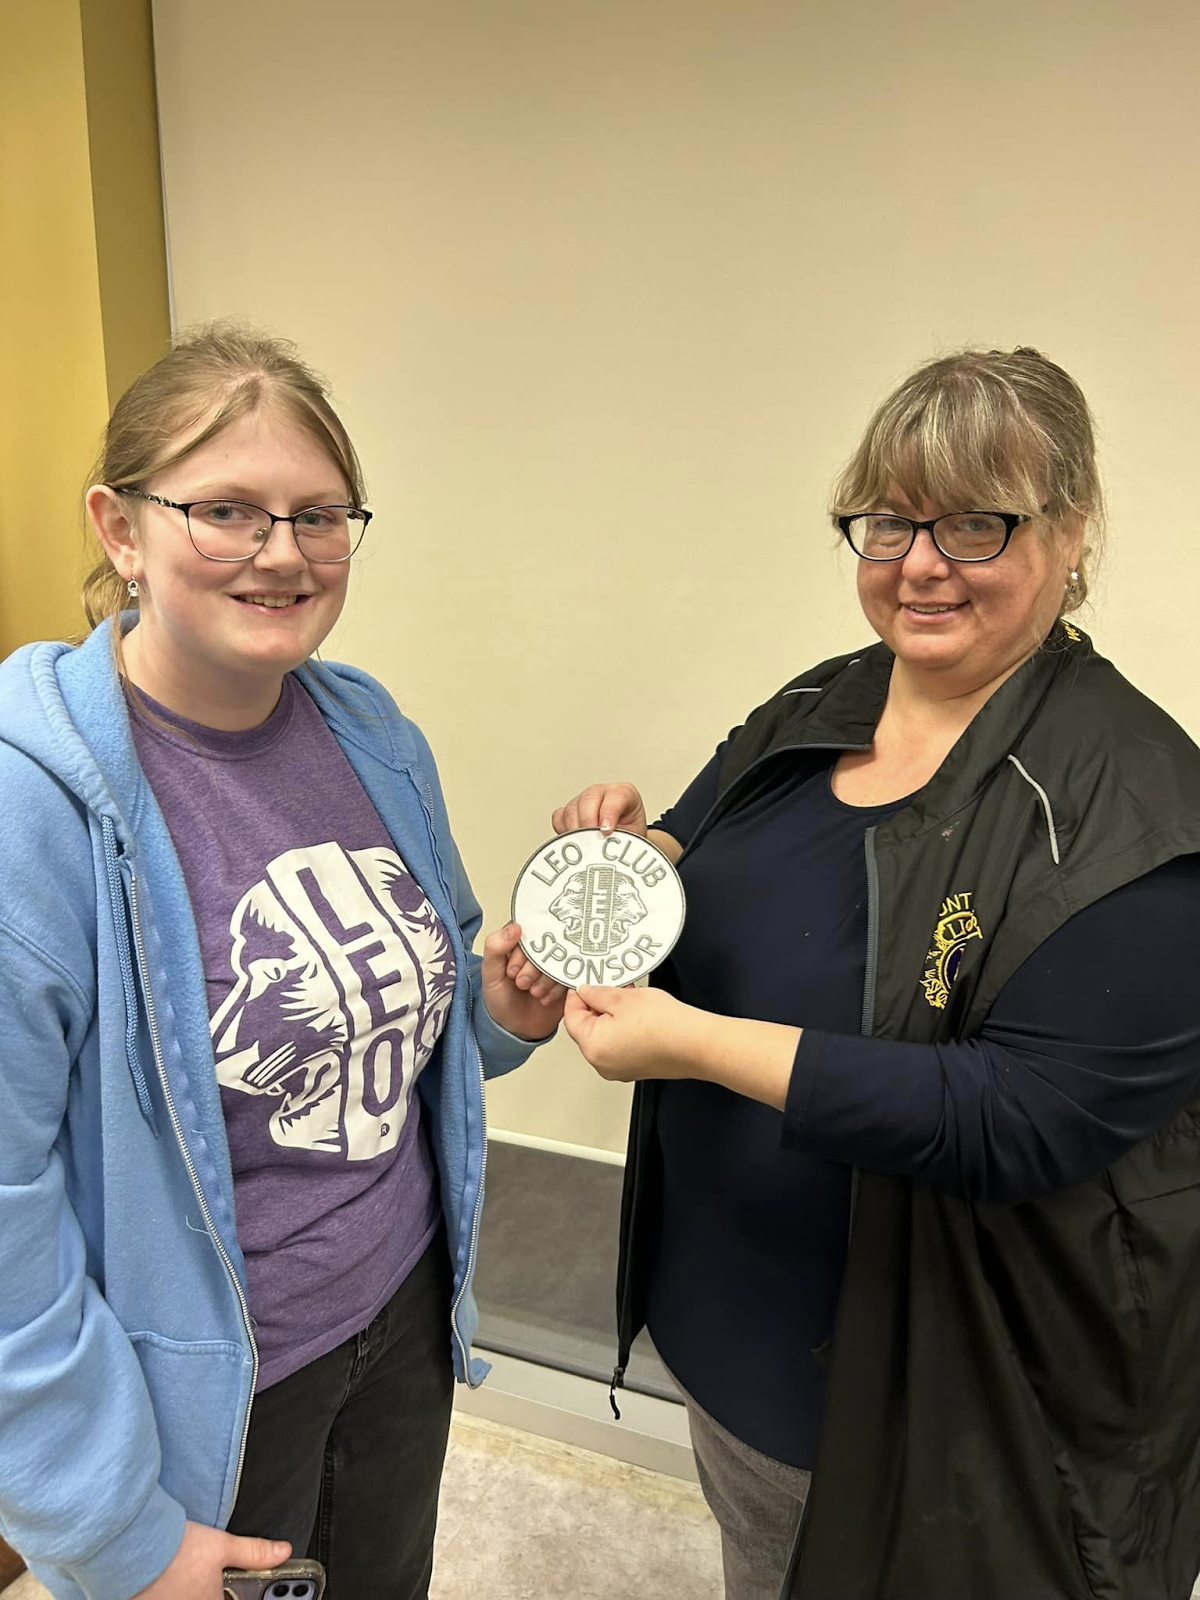 This photo features Abigail G. receiving a Little Lions plaque from another woman. 